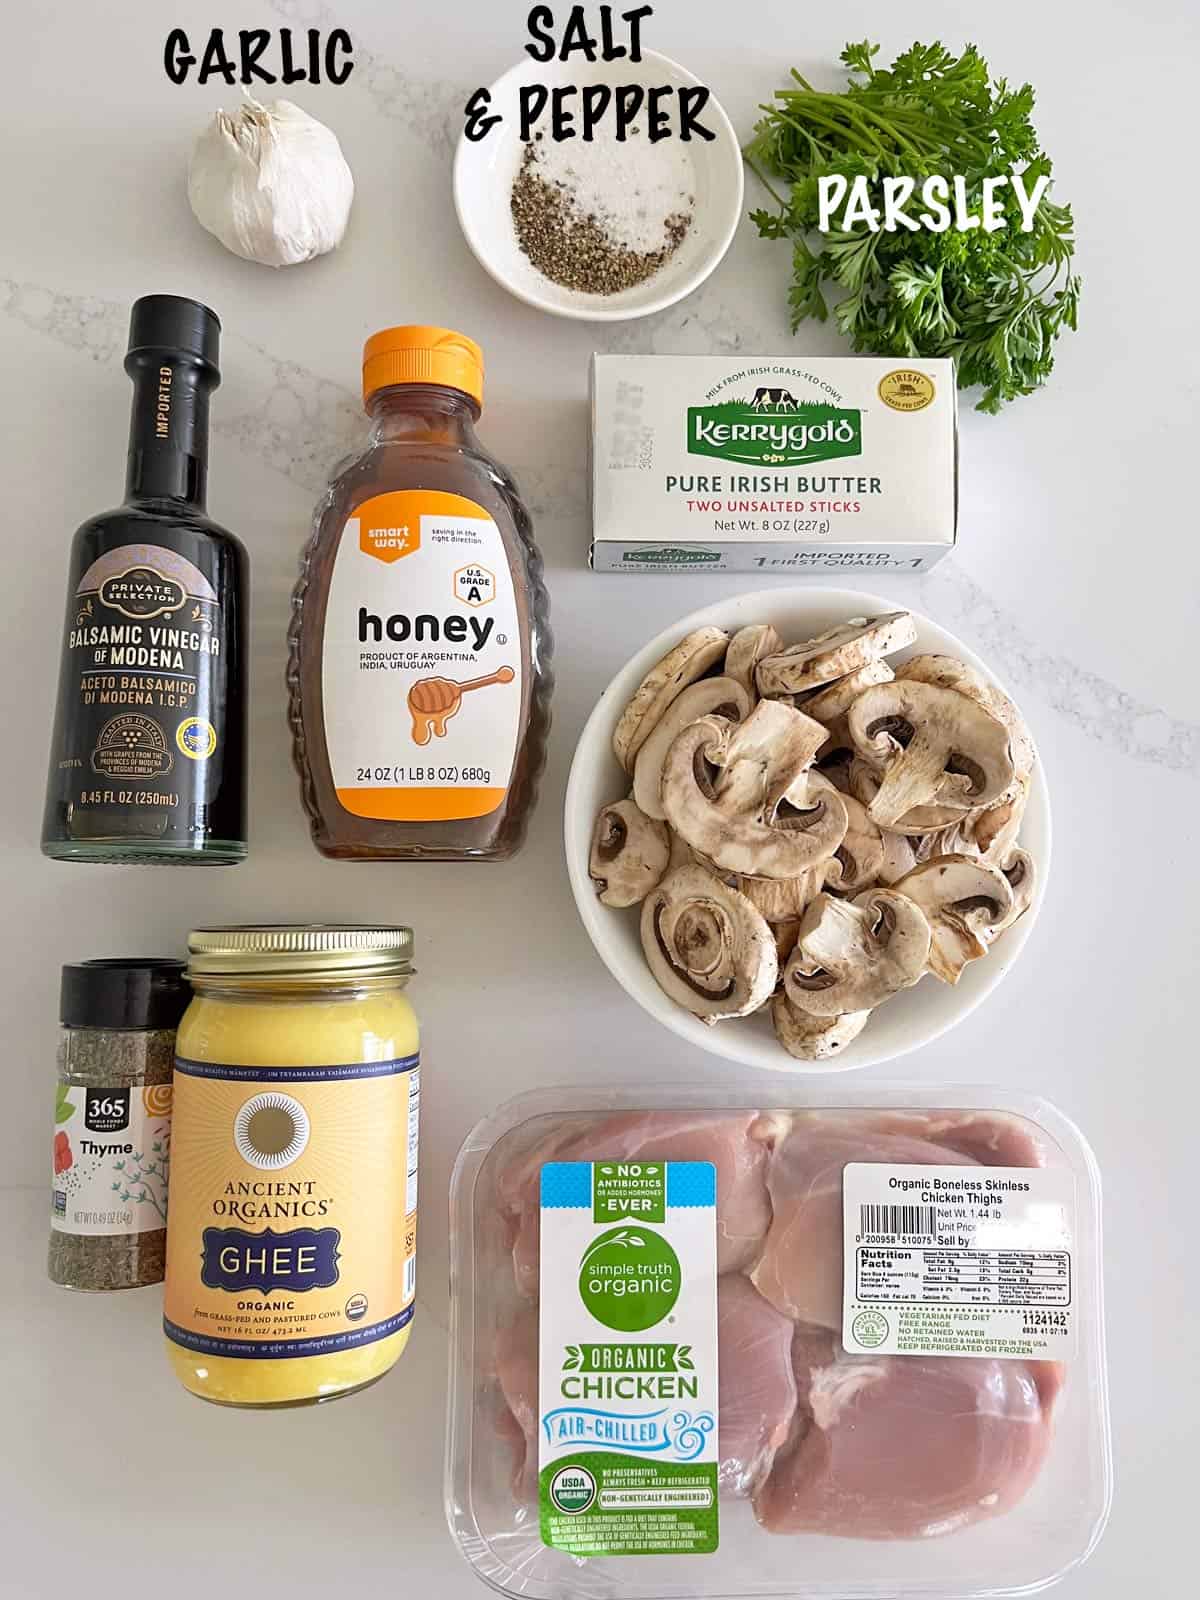 The ingredients needed to make chicken and mushrooms.